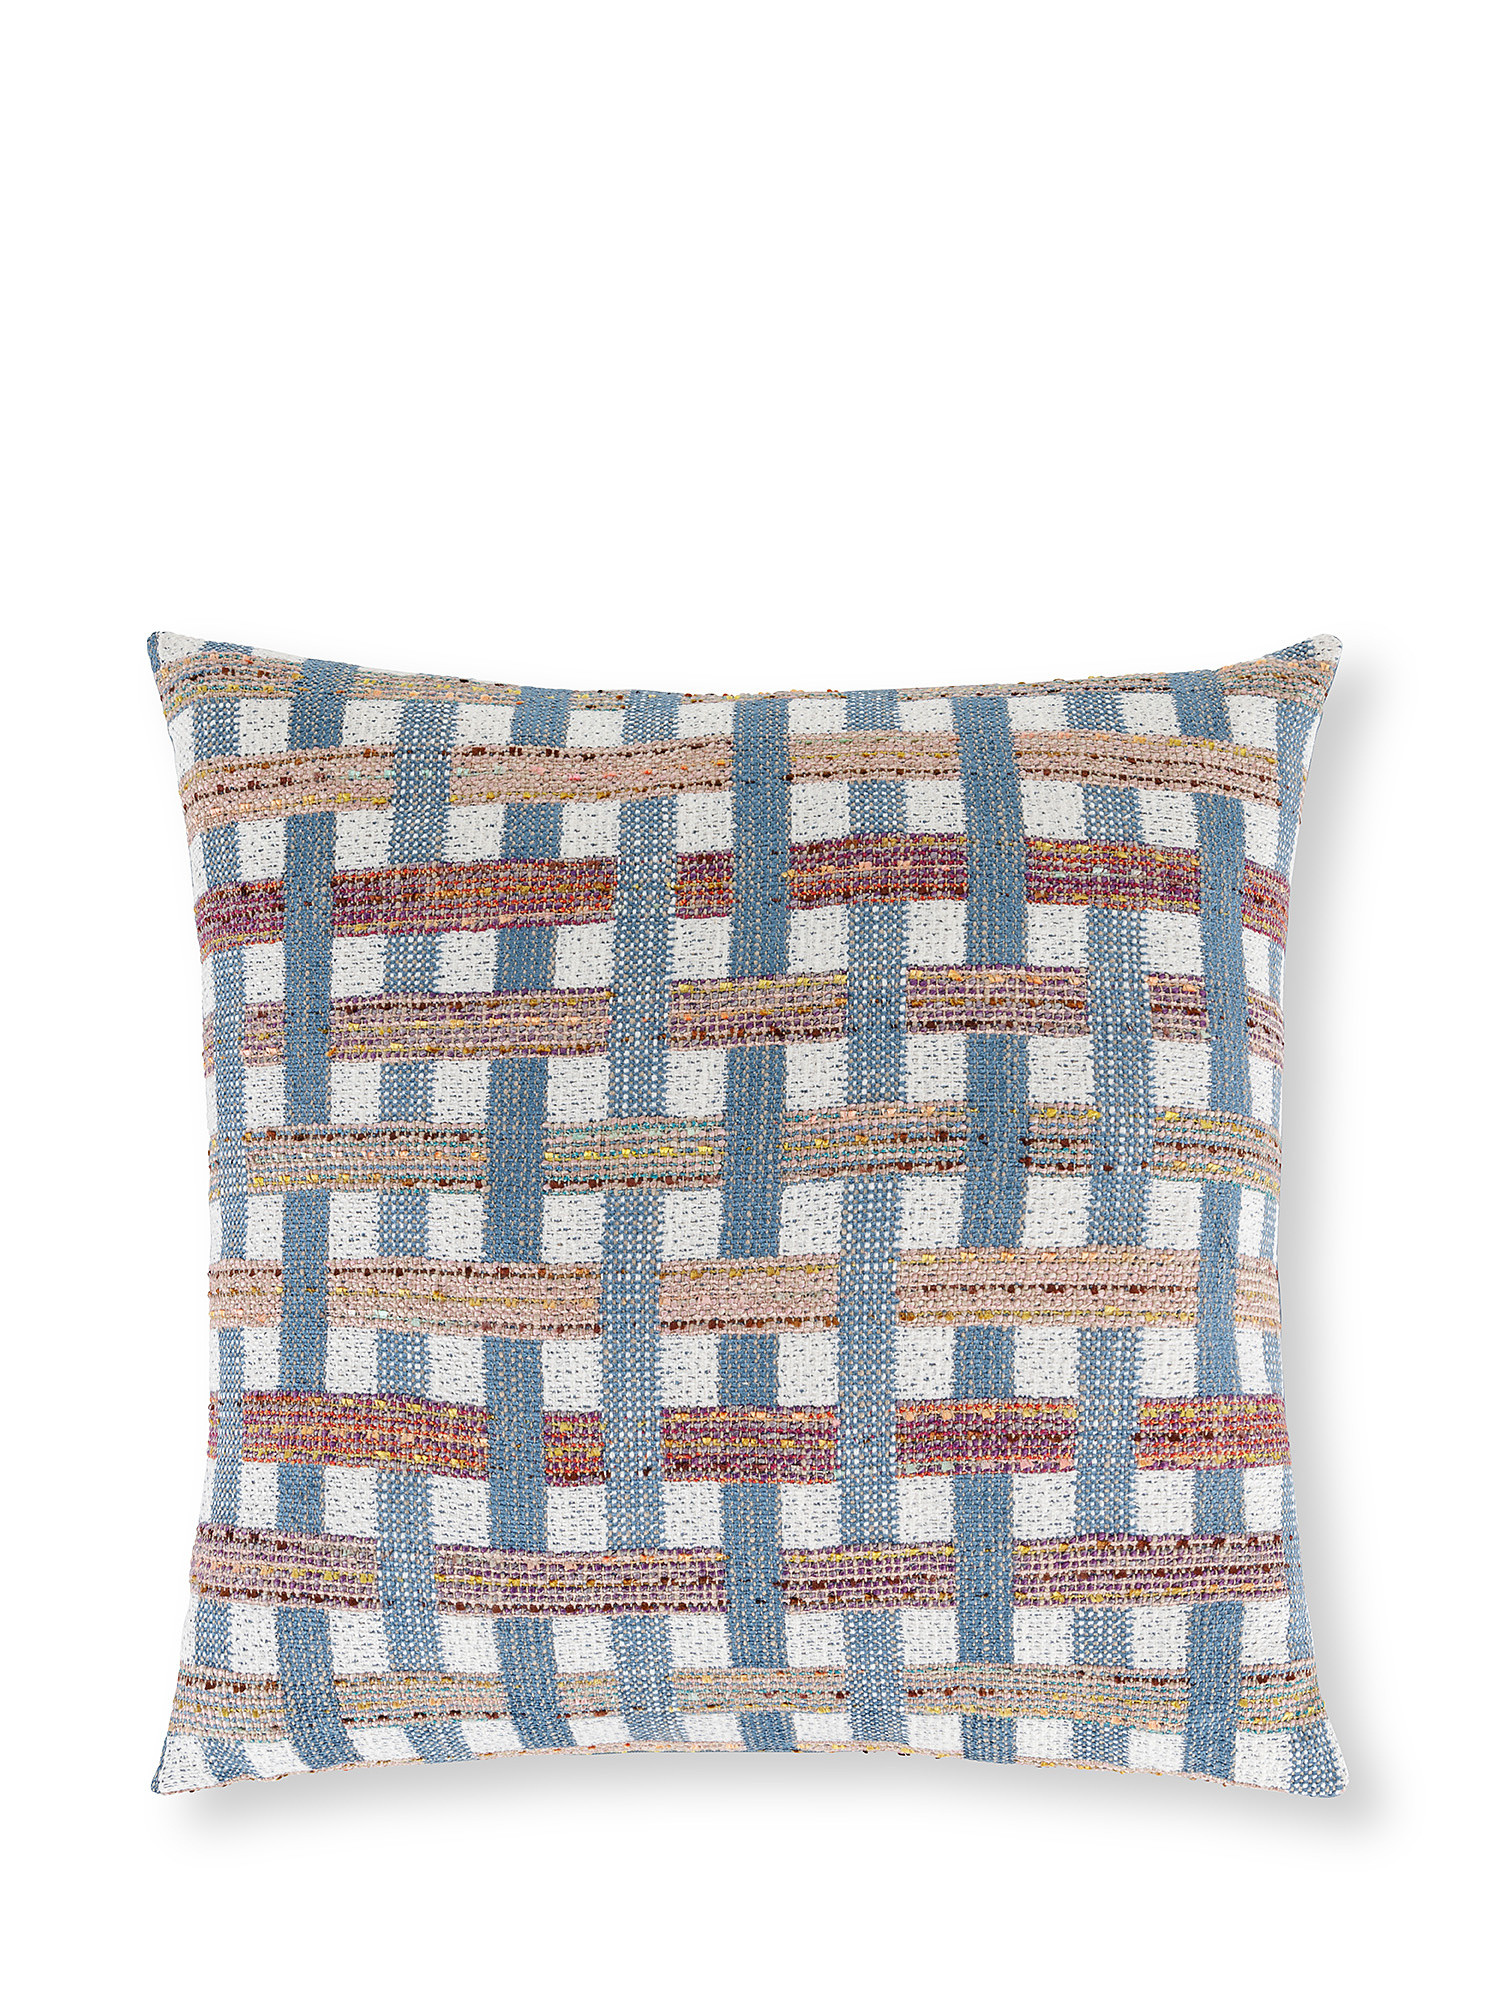 Cotton jacquard cushion with check motif 50x50cm, Brown, large image number 0